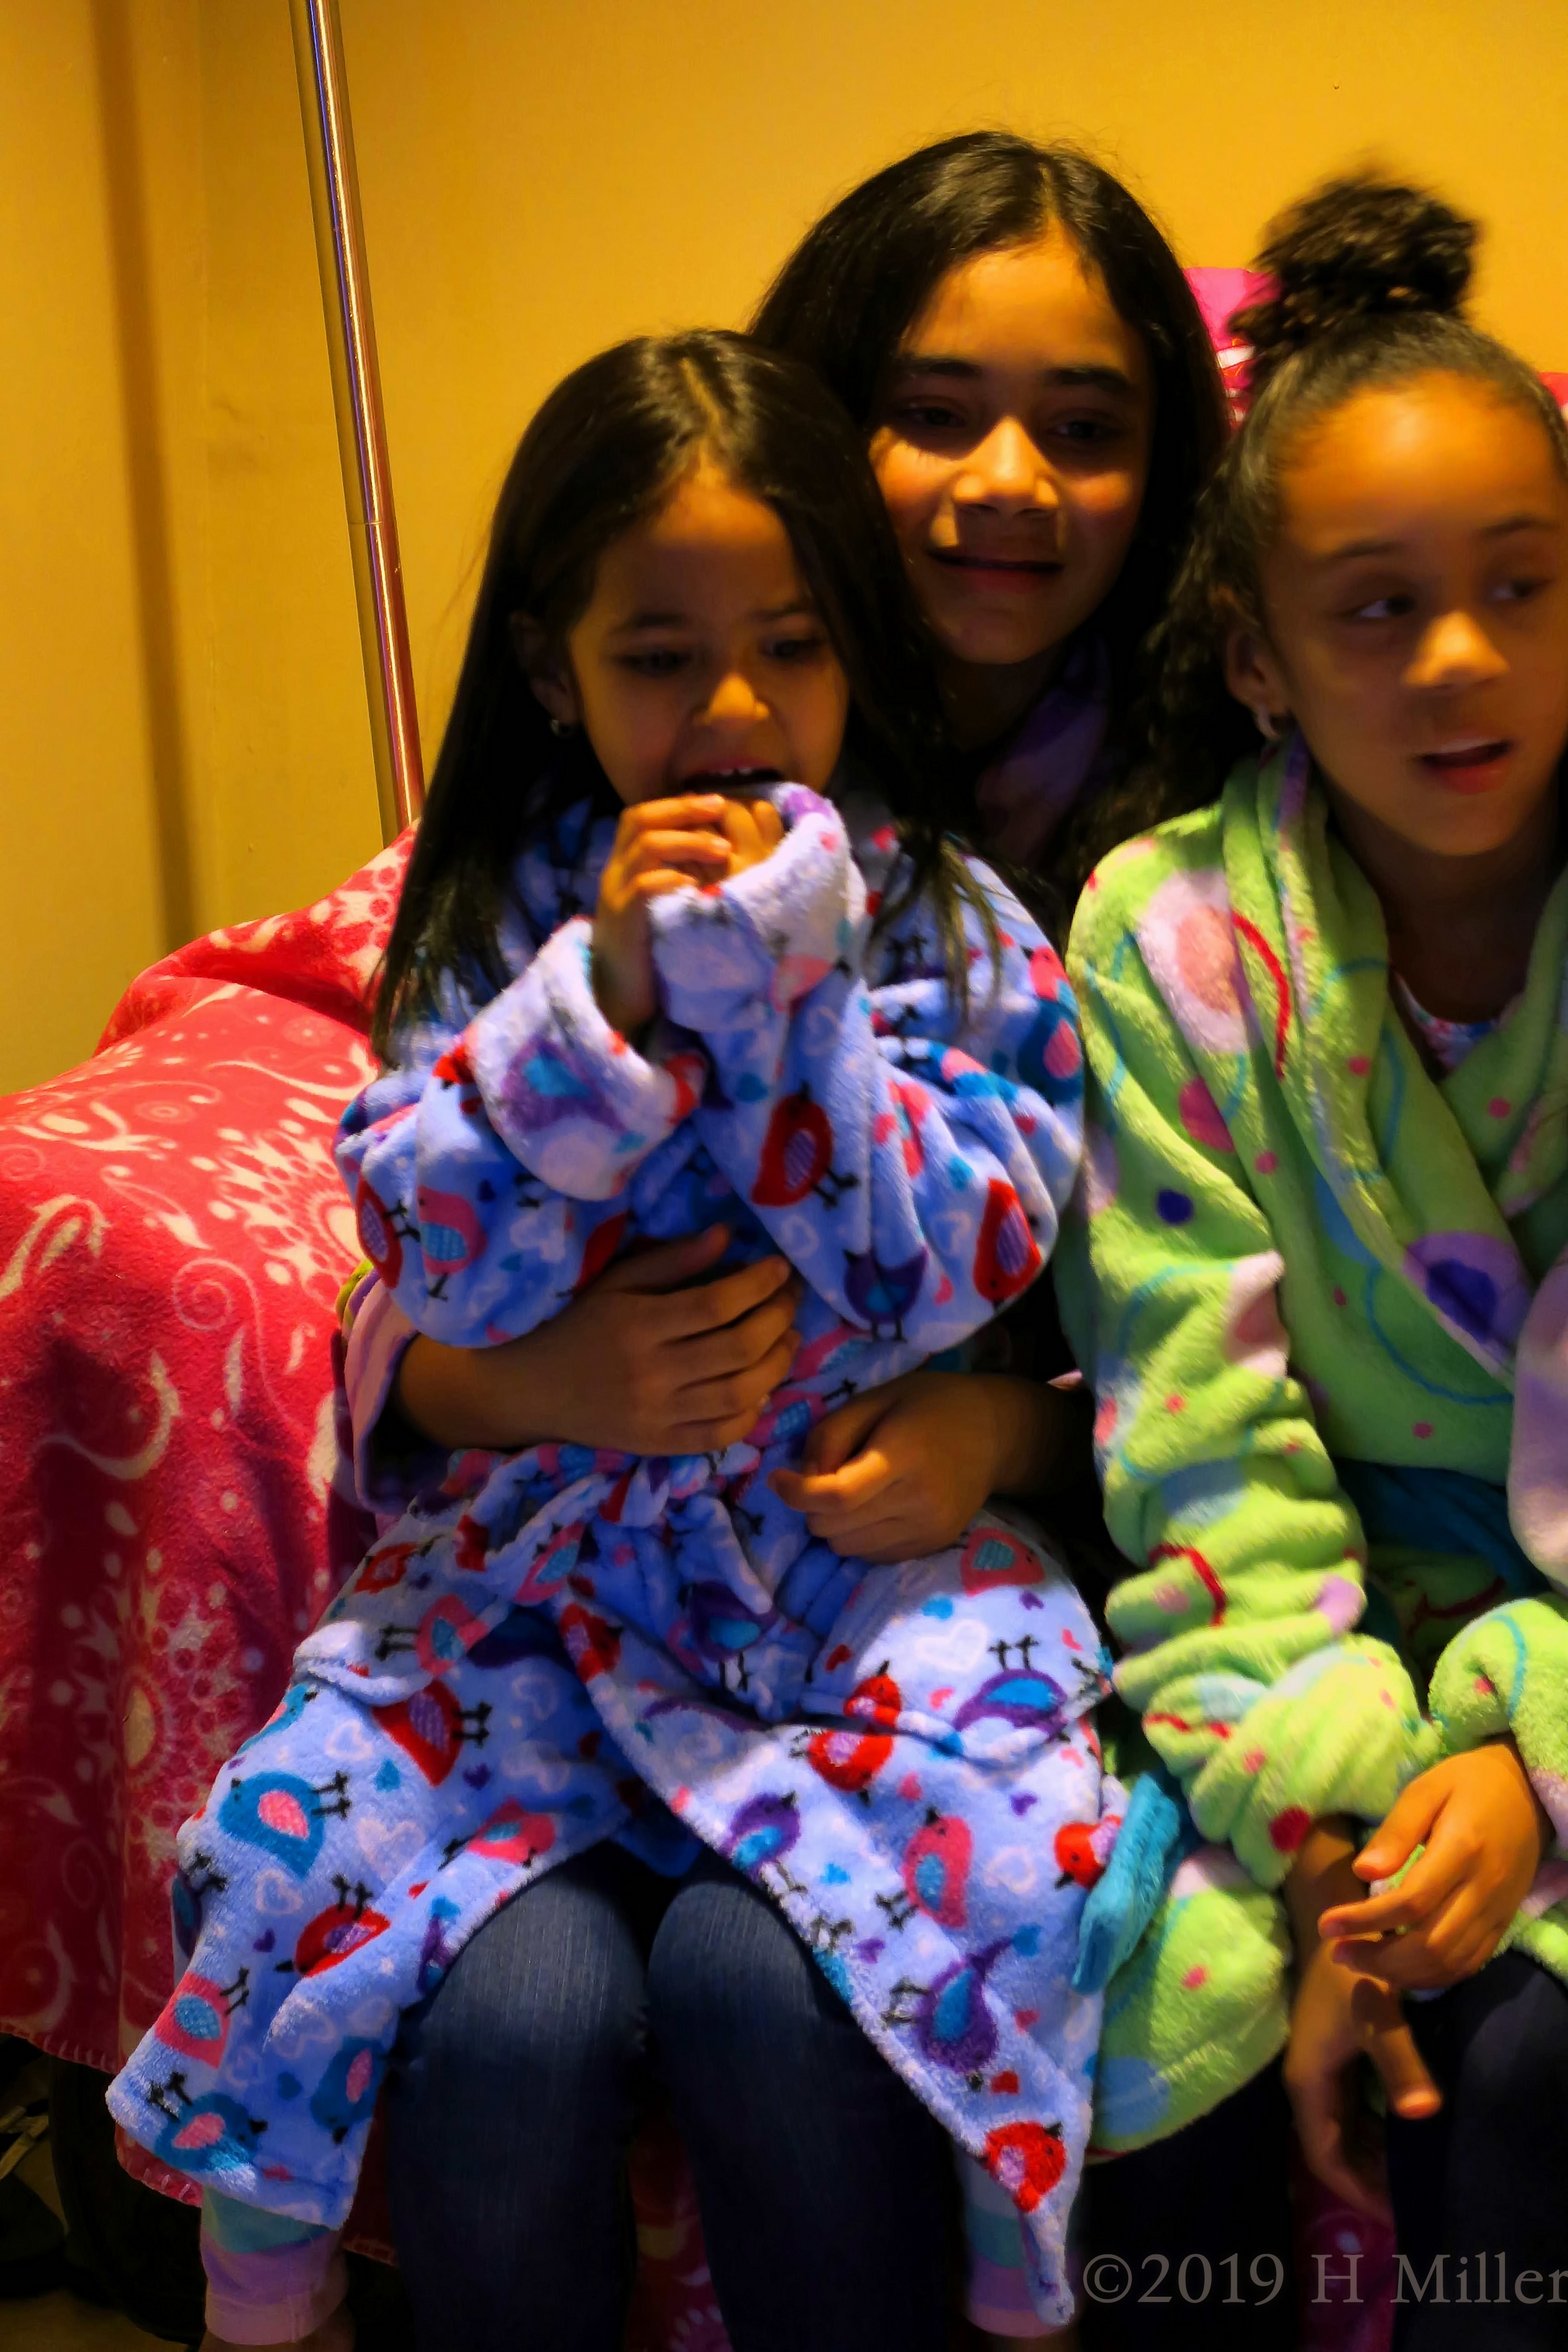 Girls Wearing Colorful Spa Robes At The Spa Party 4